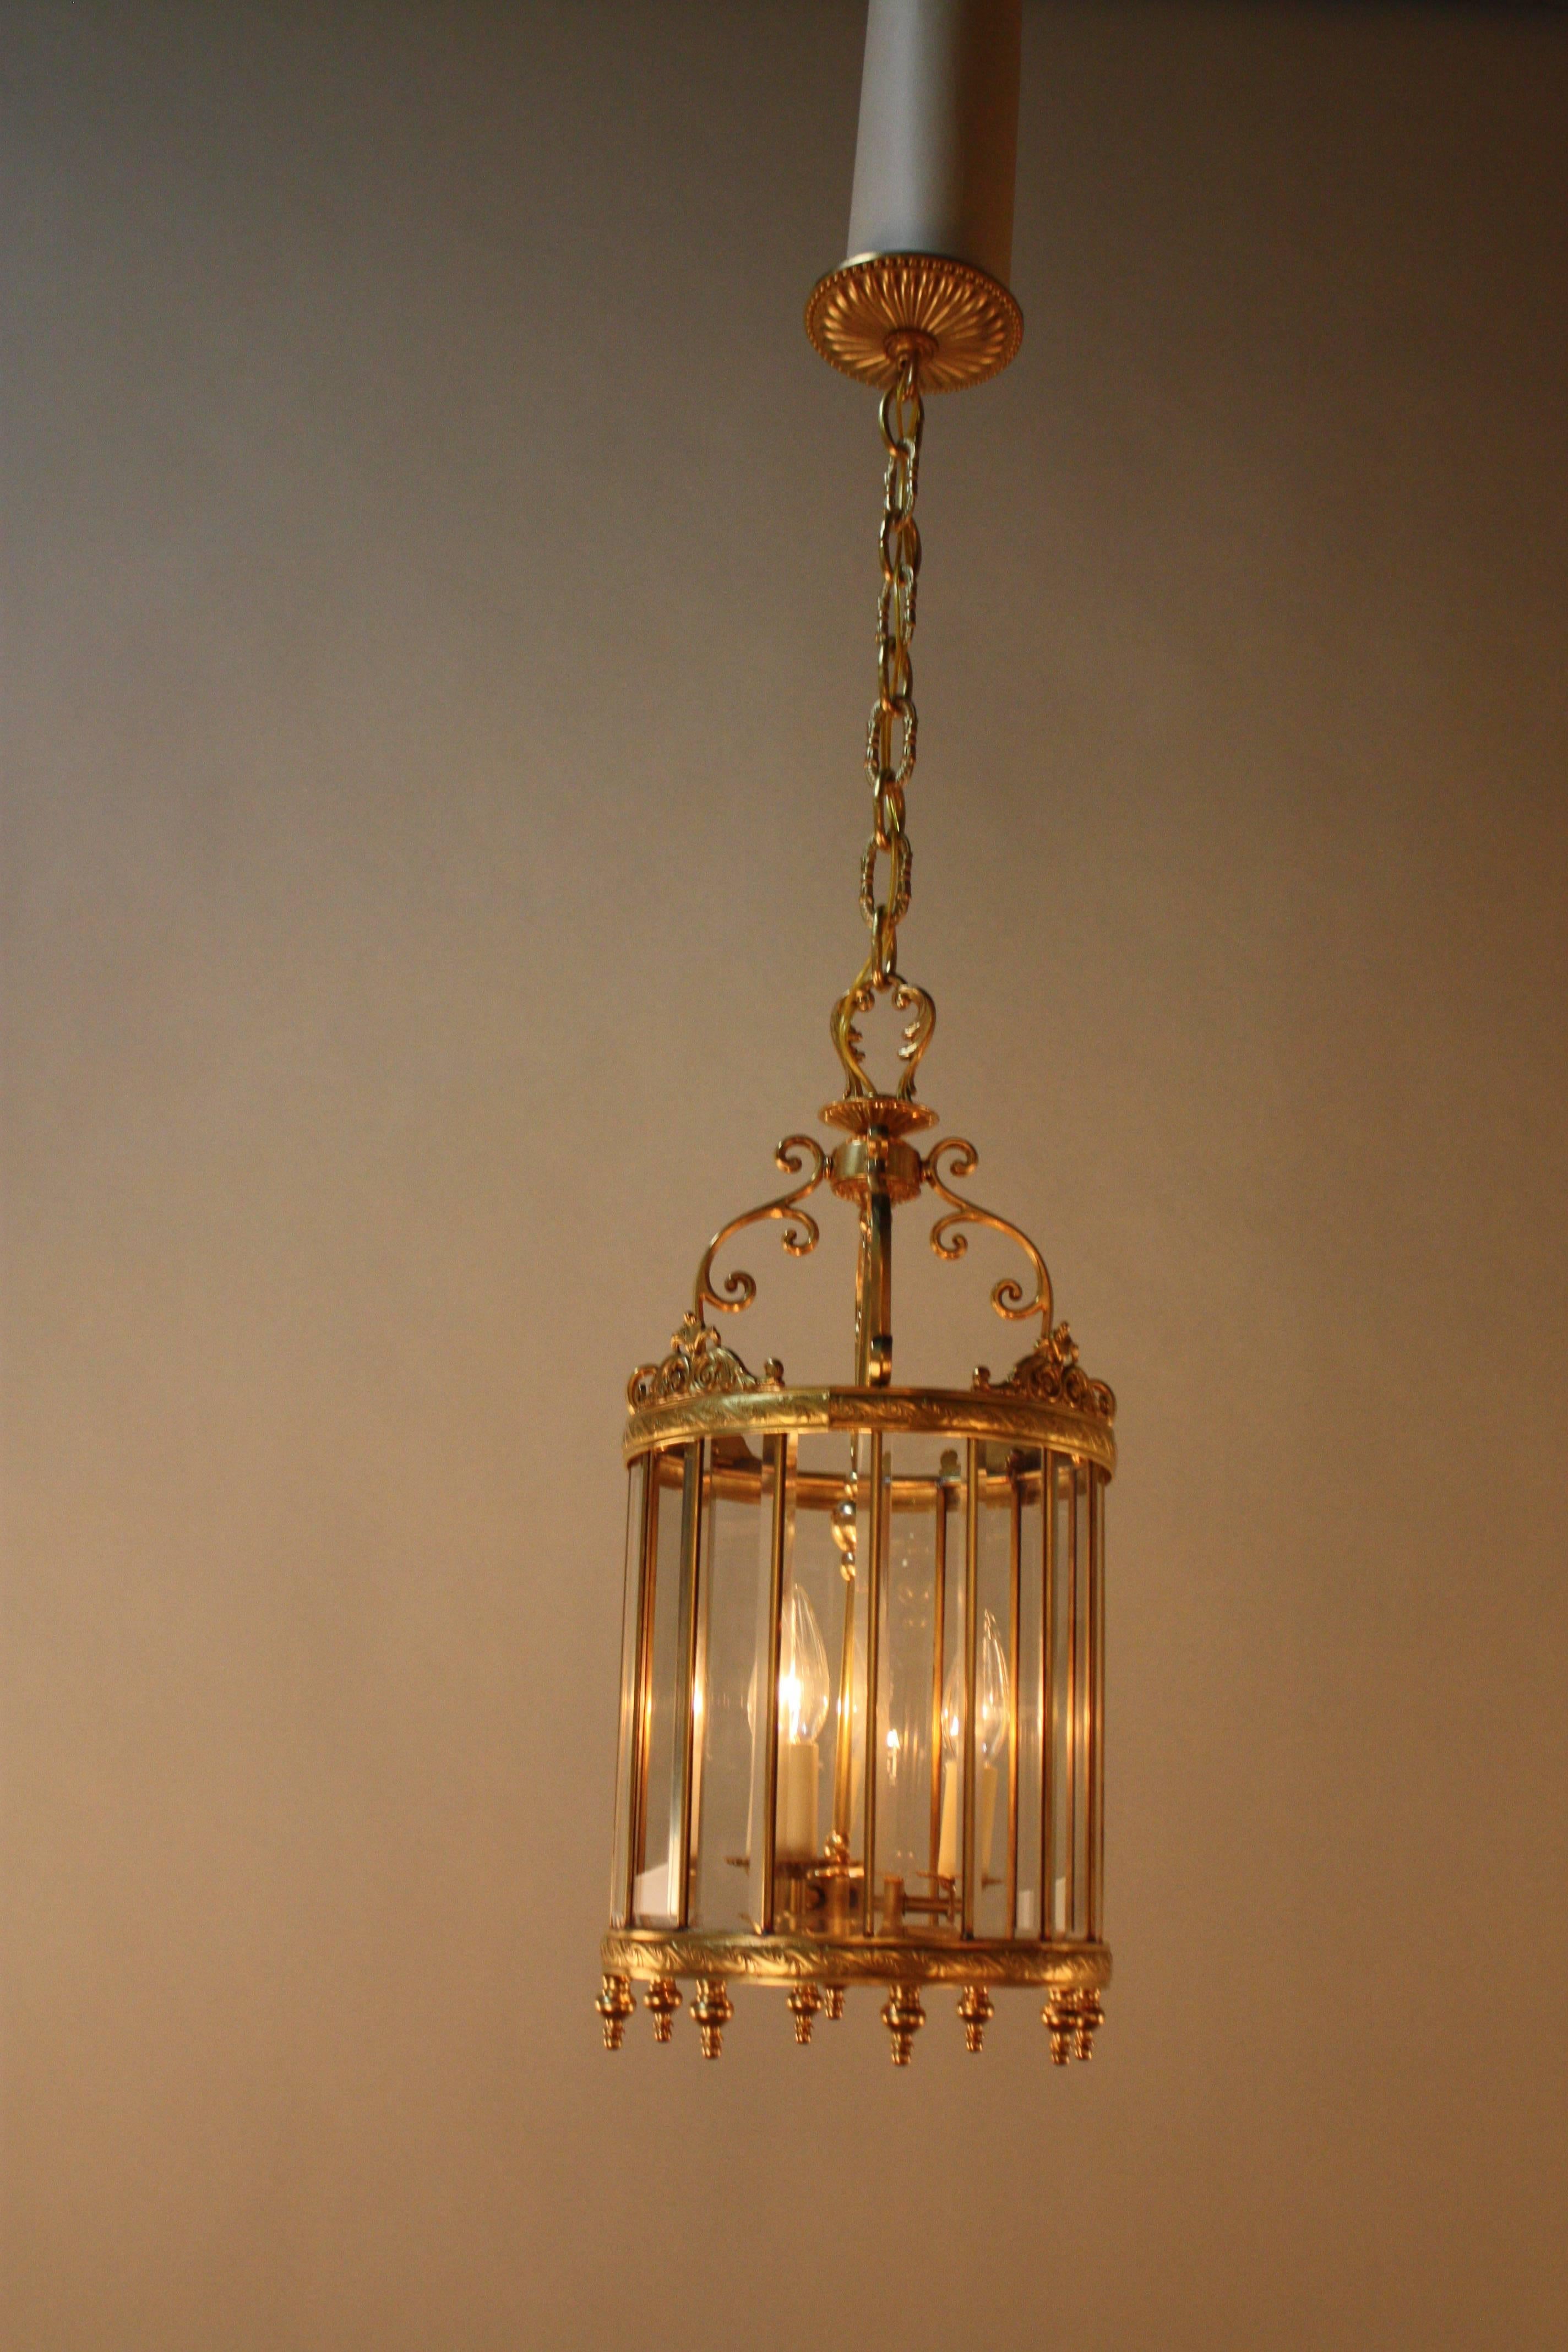 Elegant three-light bronze lantern with multi beveled glass panels.
Fully installed with one link of chain and canopy is 24